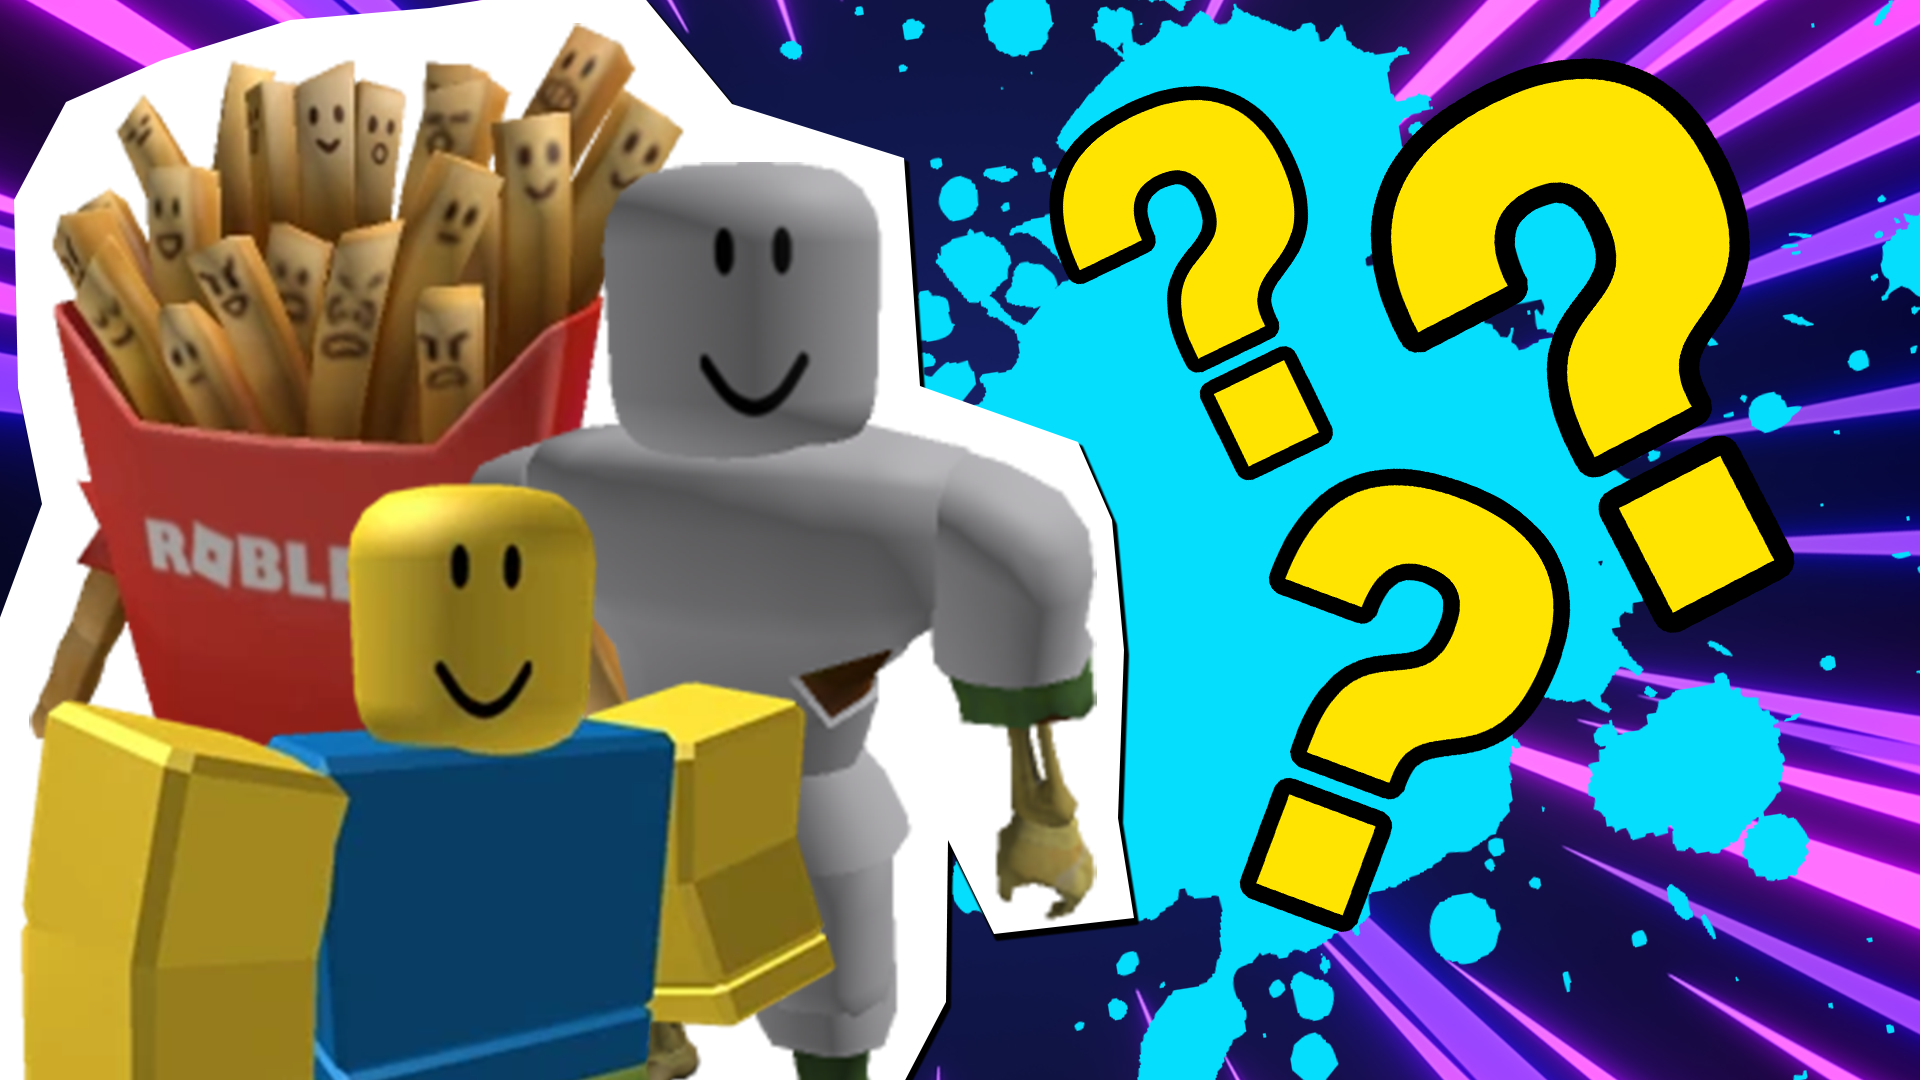 Robux For Roblox Quiz by ZINE ABAOUI